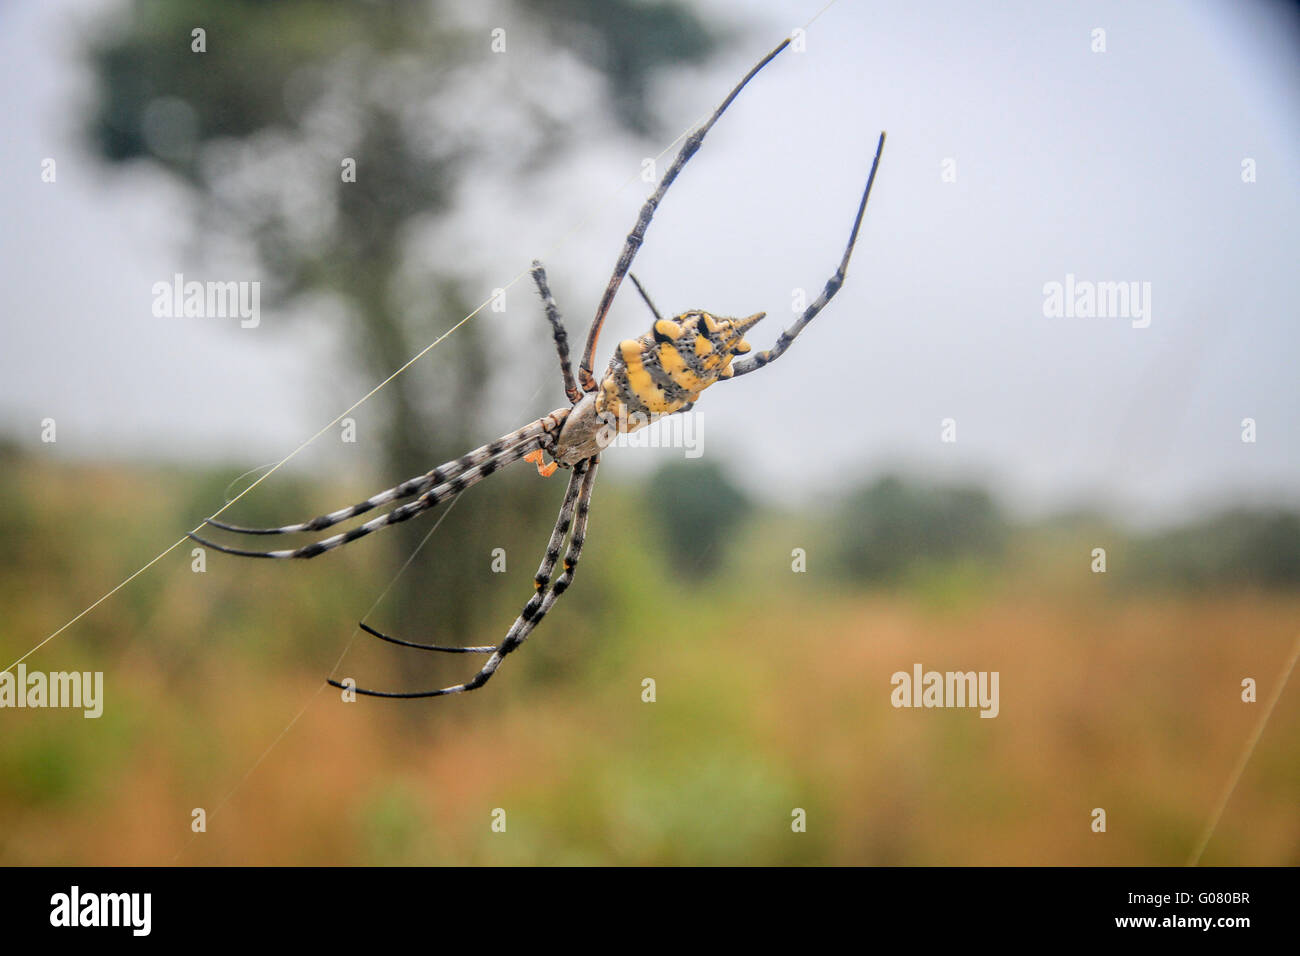 Female Black And Yellow Garden Spider In The Selati Game Reserve